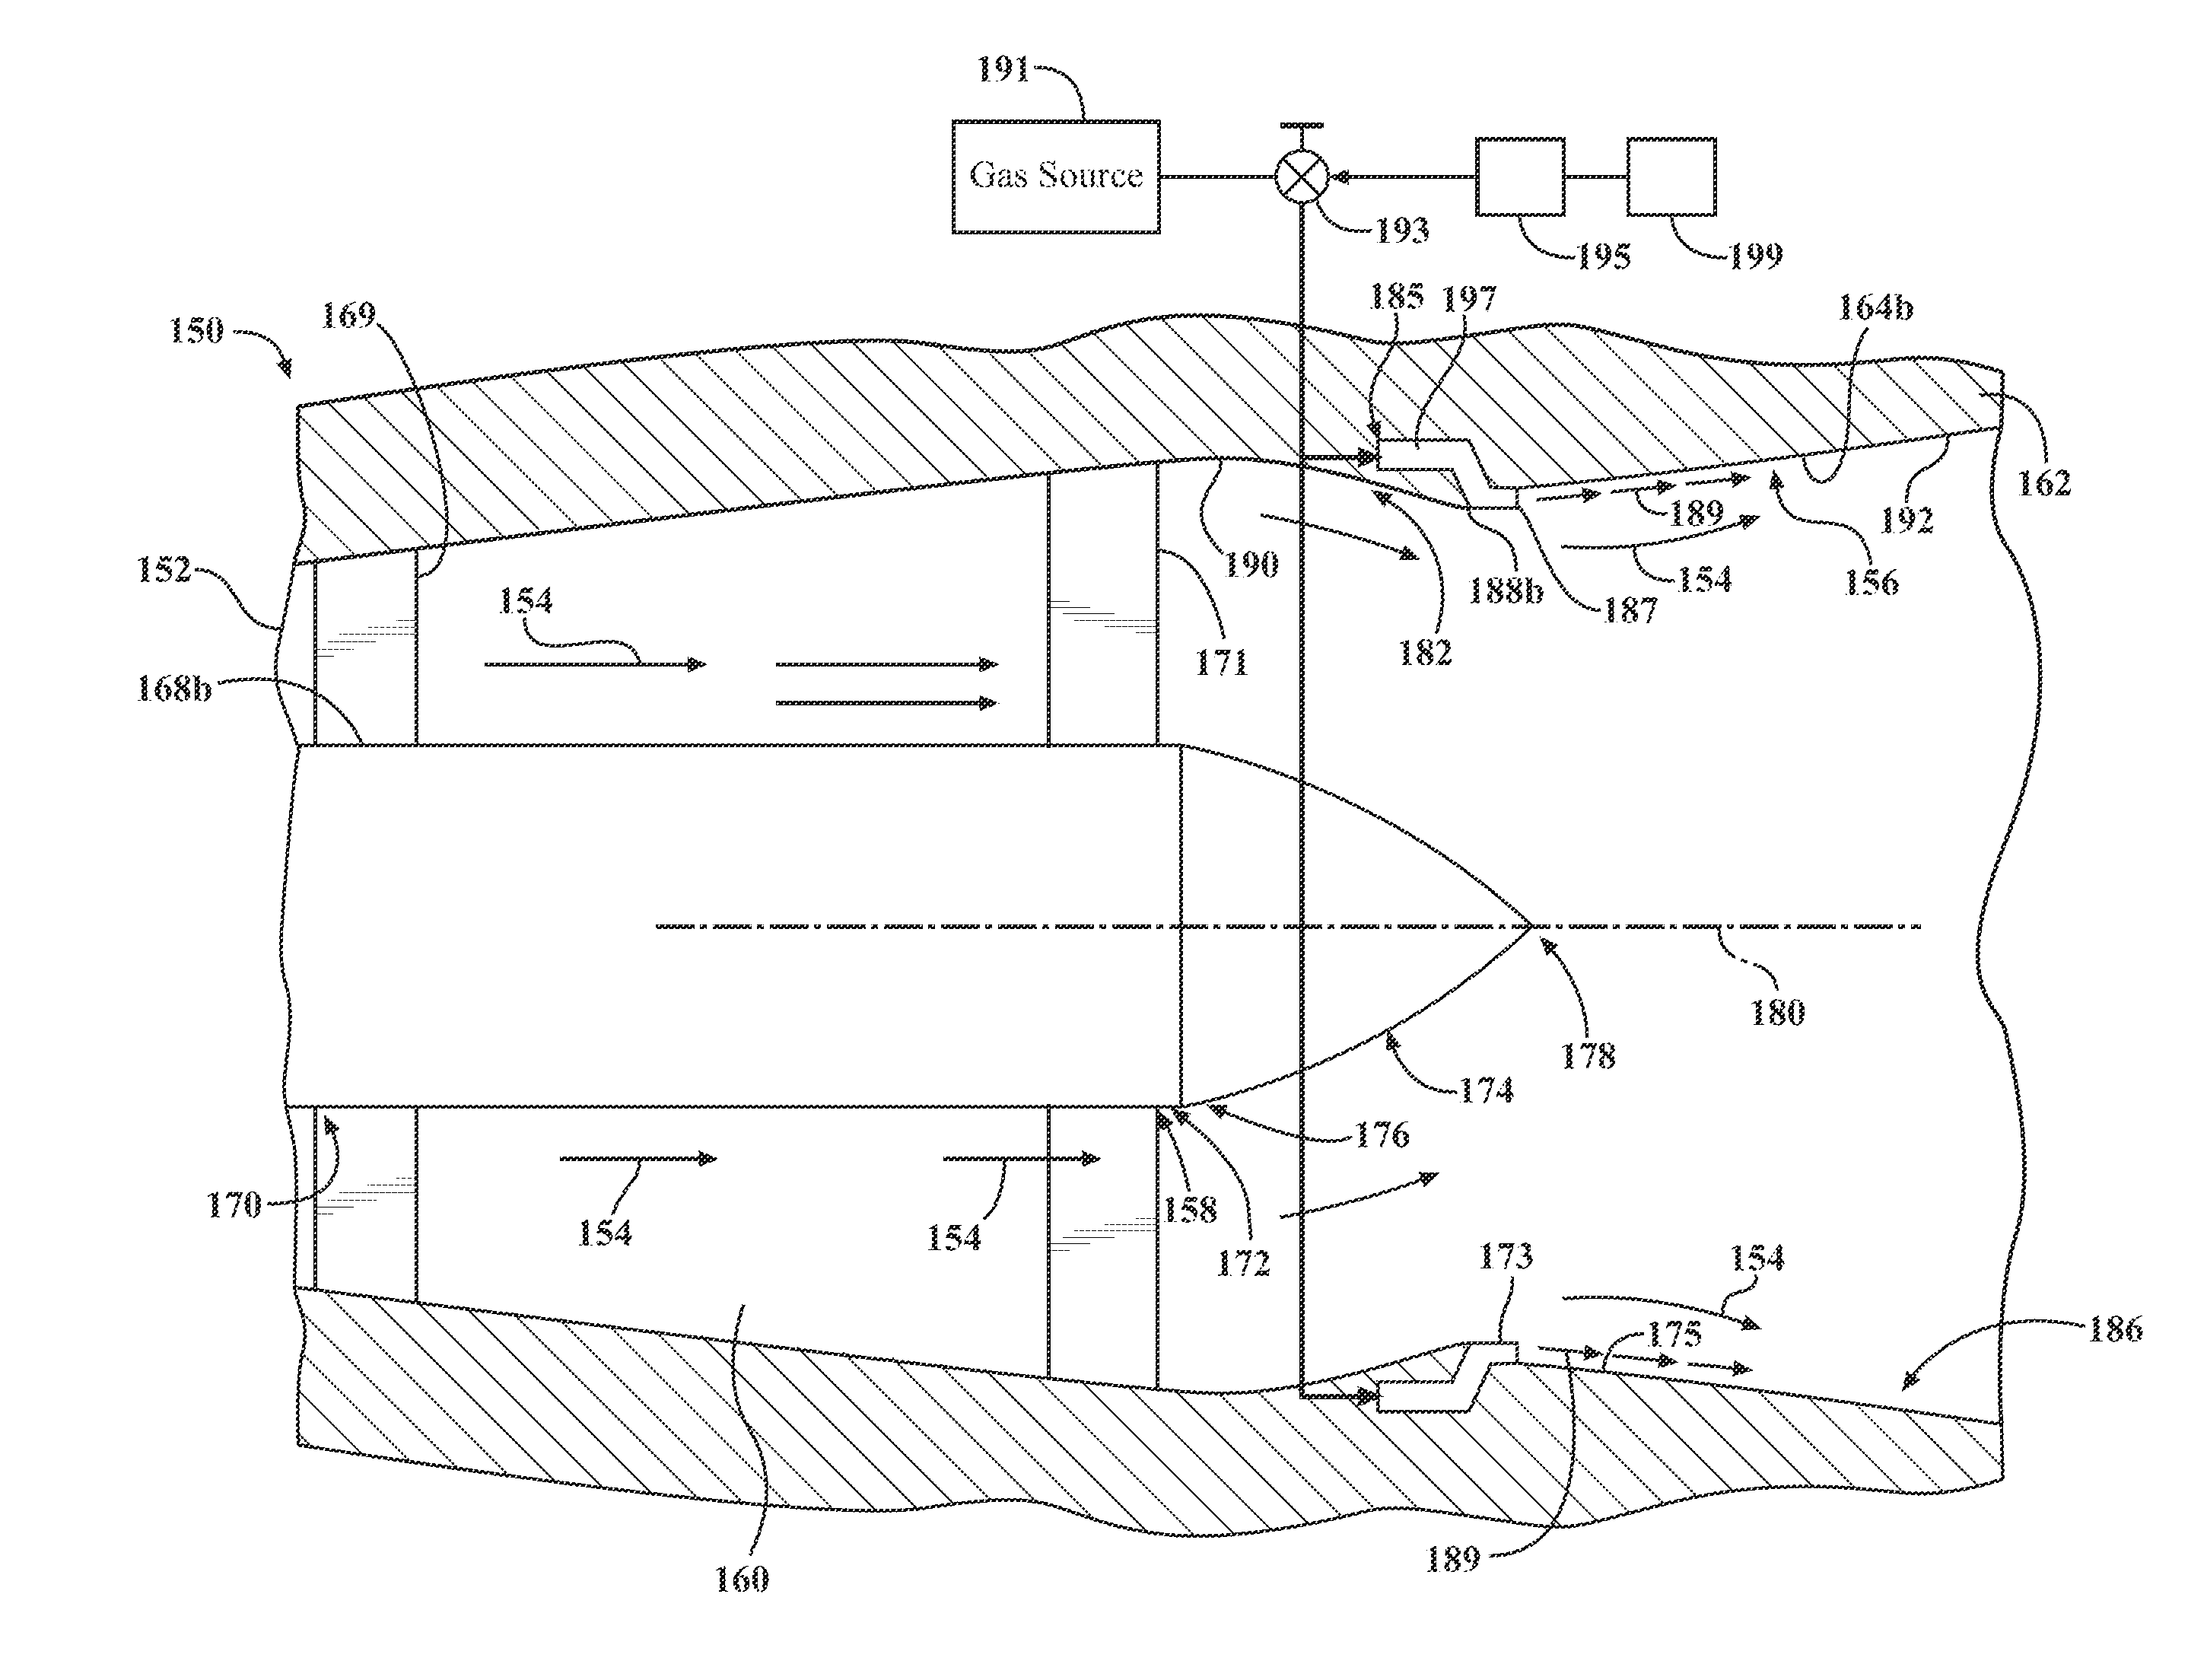 Turbine exhaust diffuser with region of reduced flow area and outer boundary gas flow